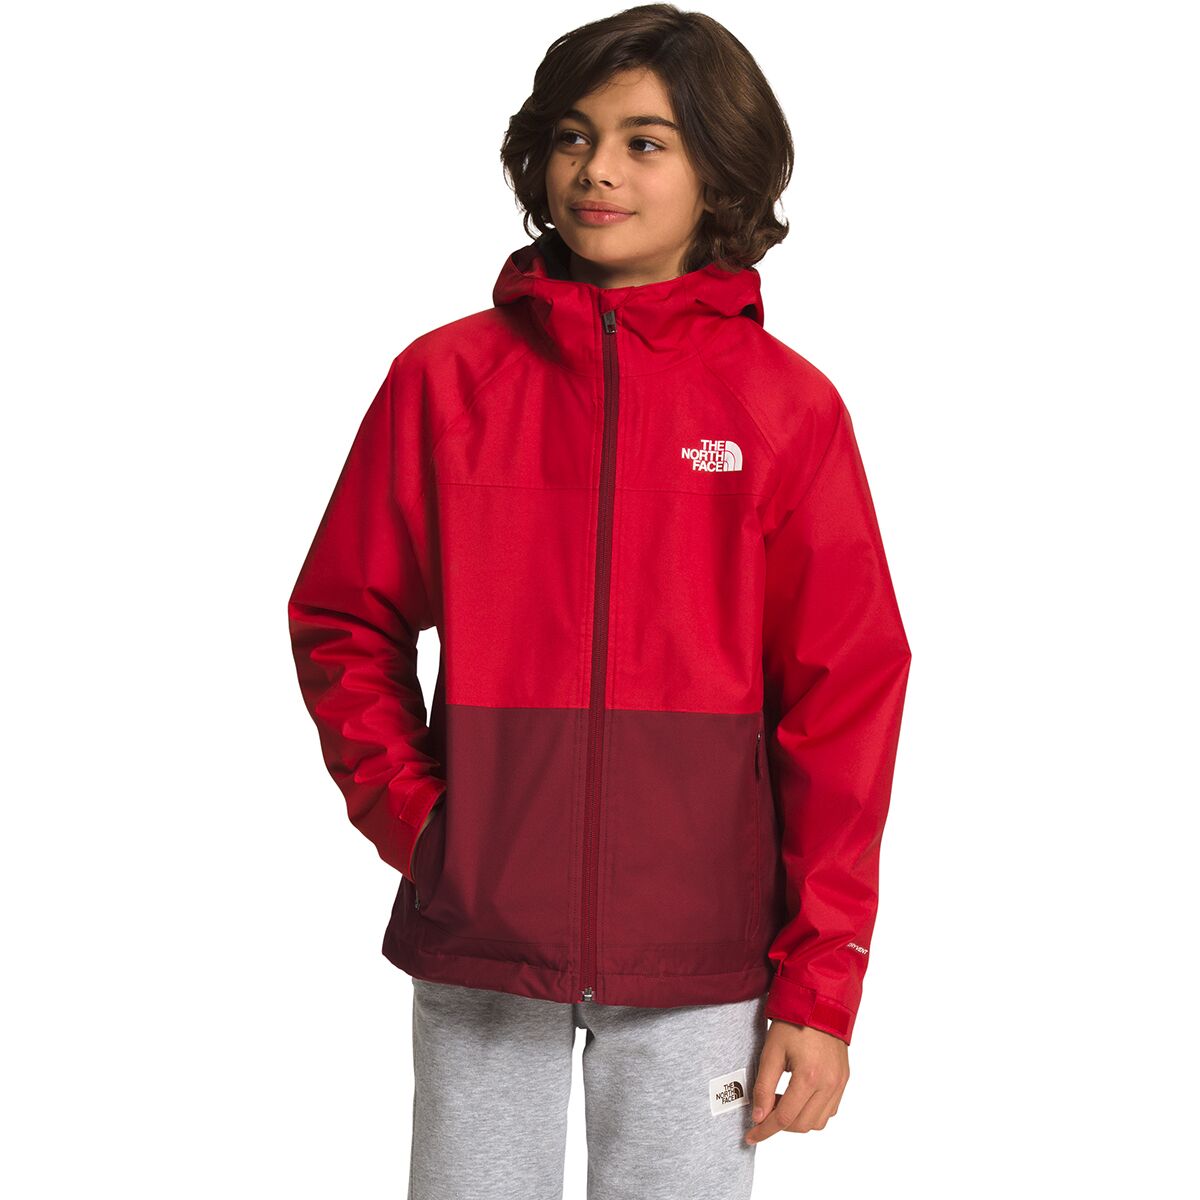 The North Face Vortex Triclimate Jacket - Boys'